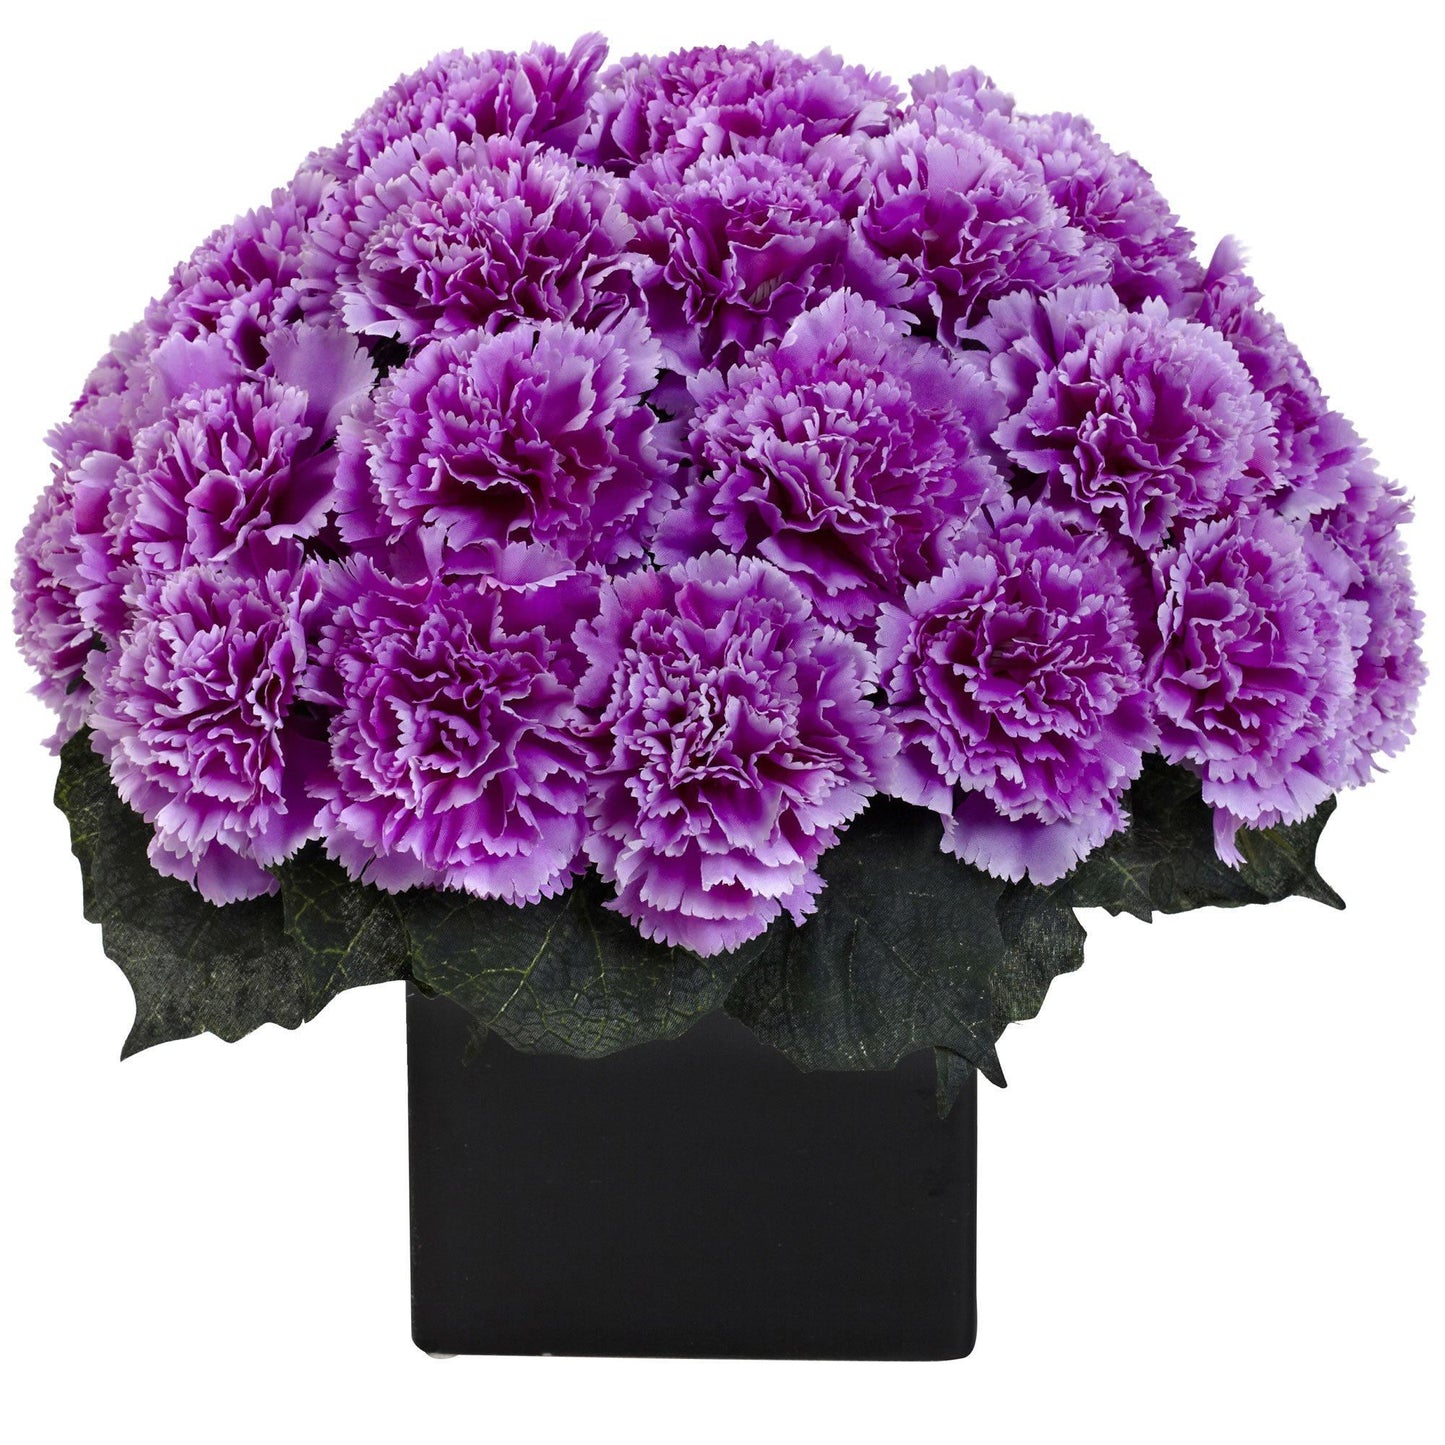 Carnation Arrangement w/Vase by Nearly Natural